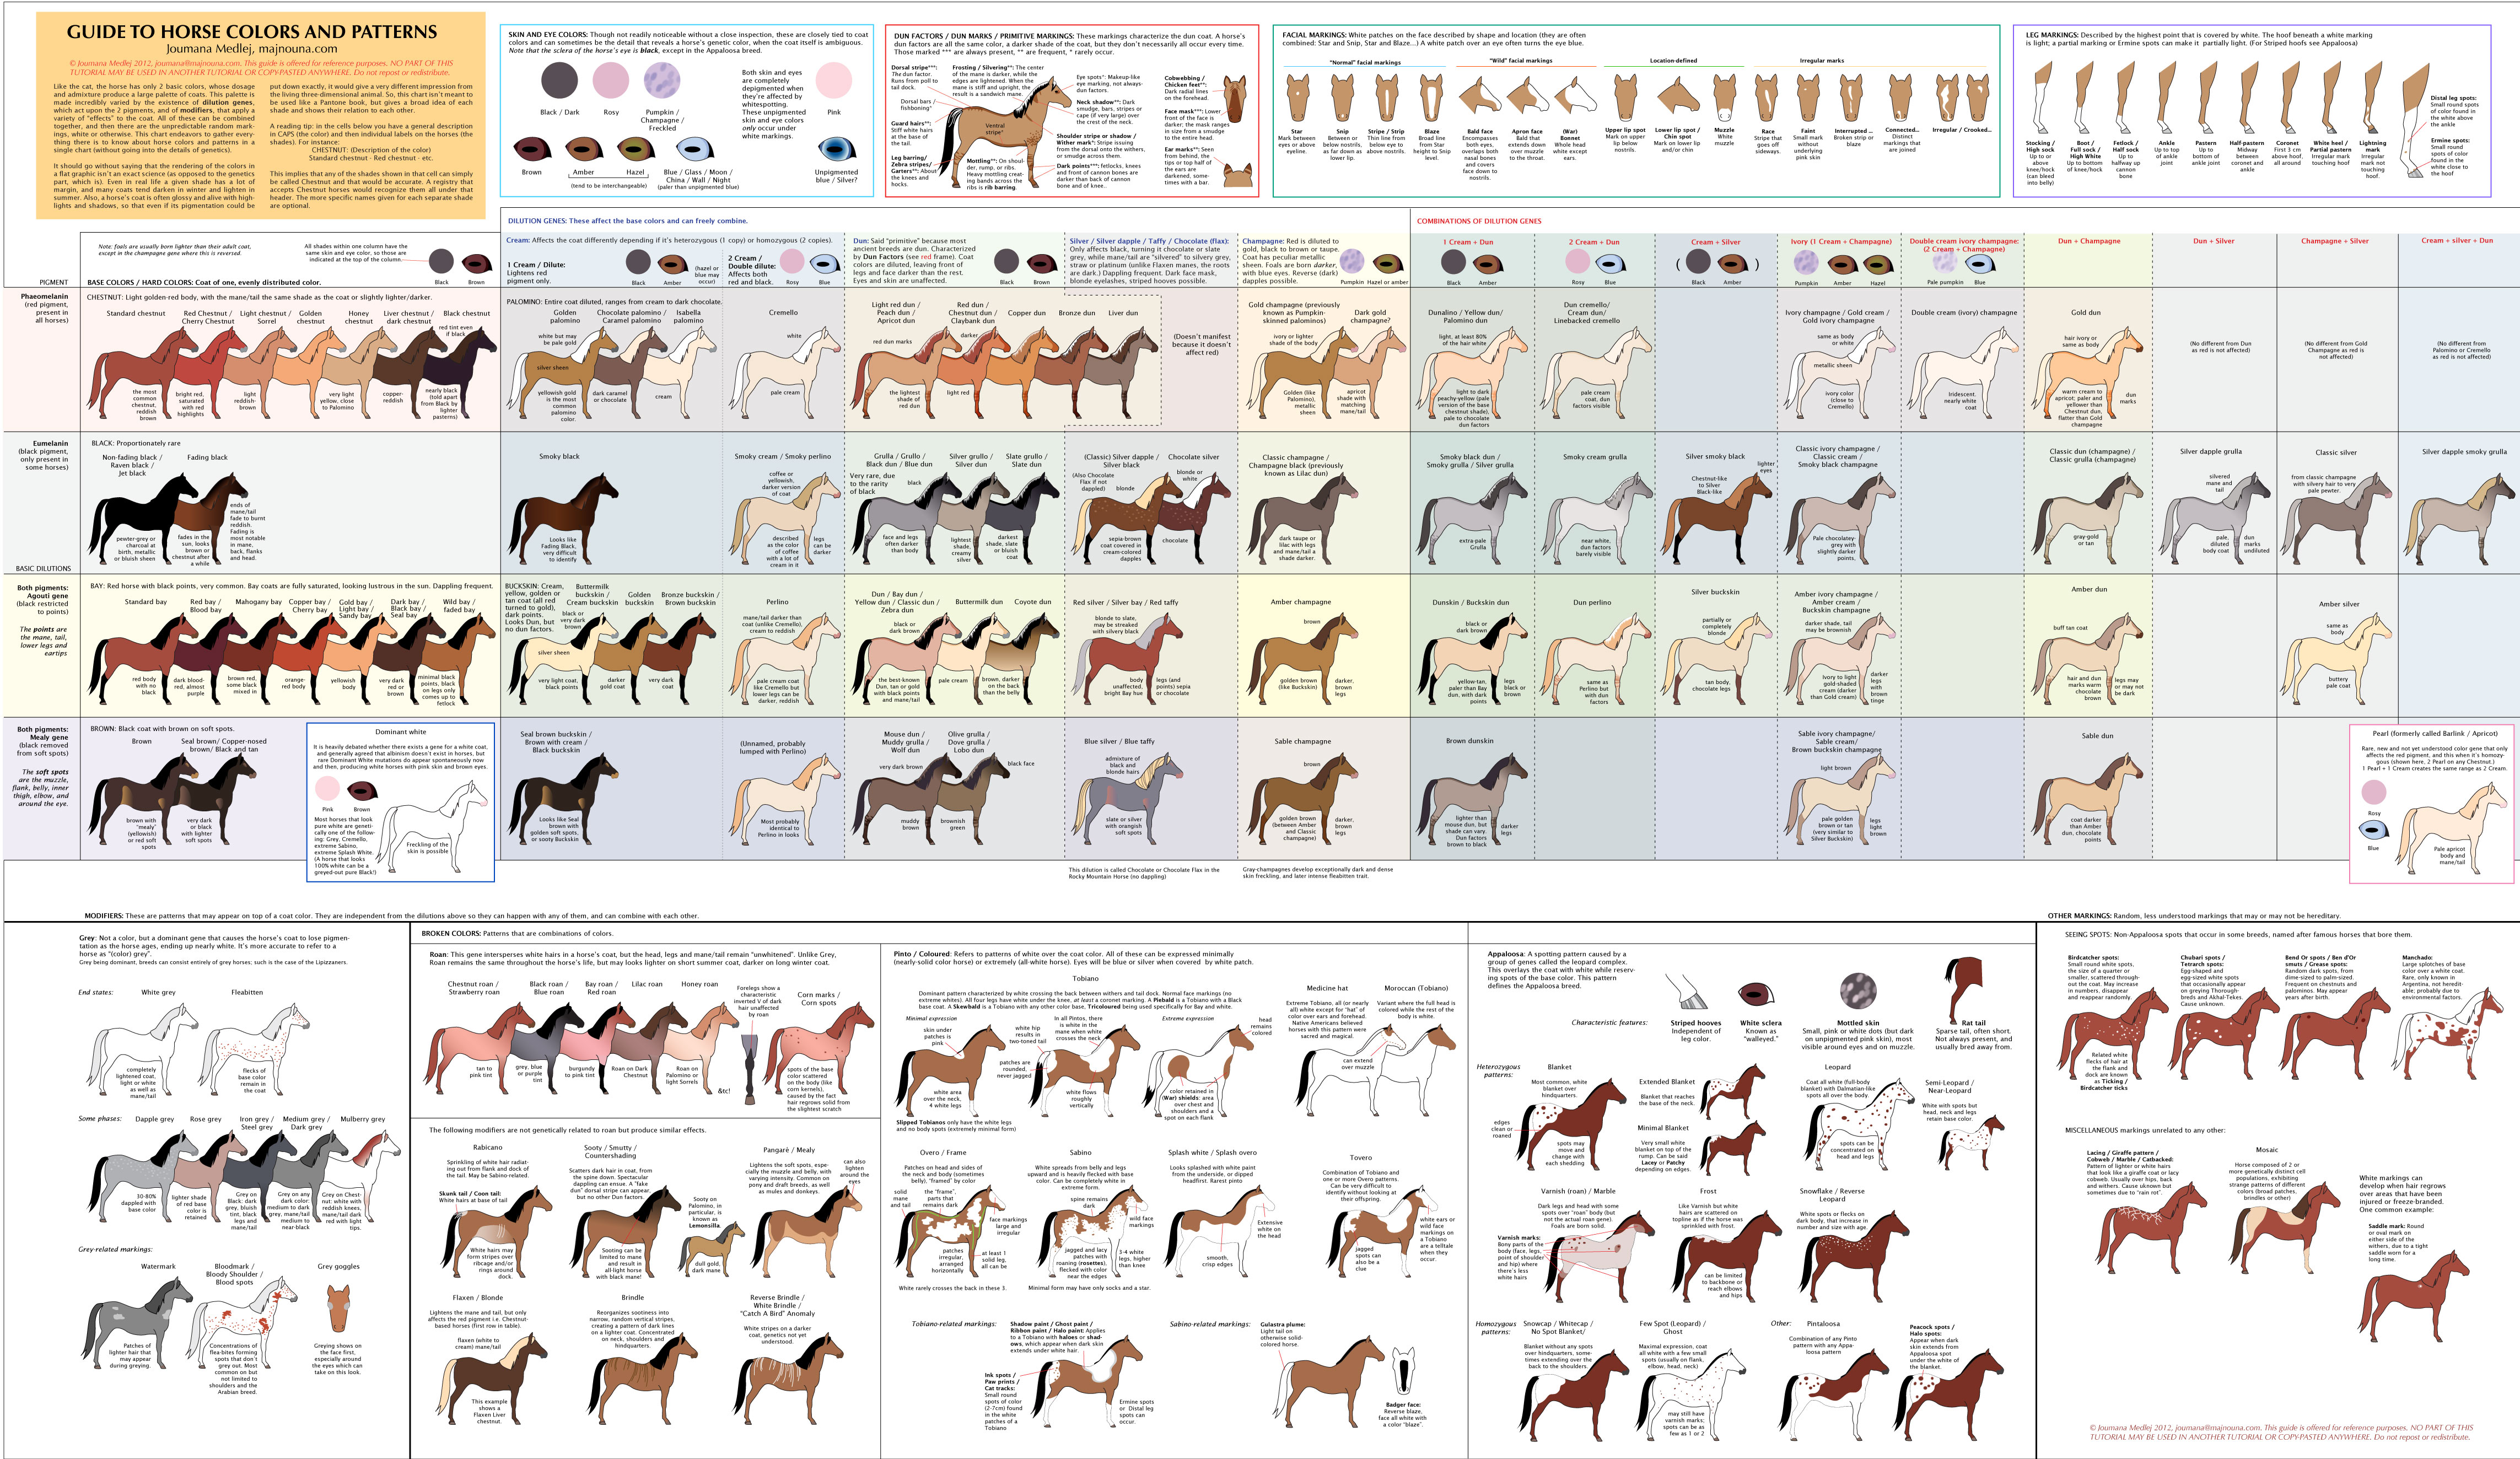 Guide to Horse Colors and Patterns